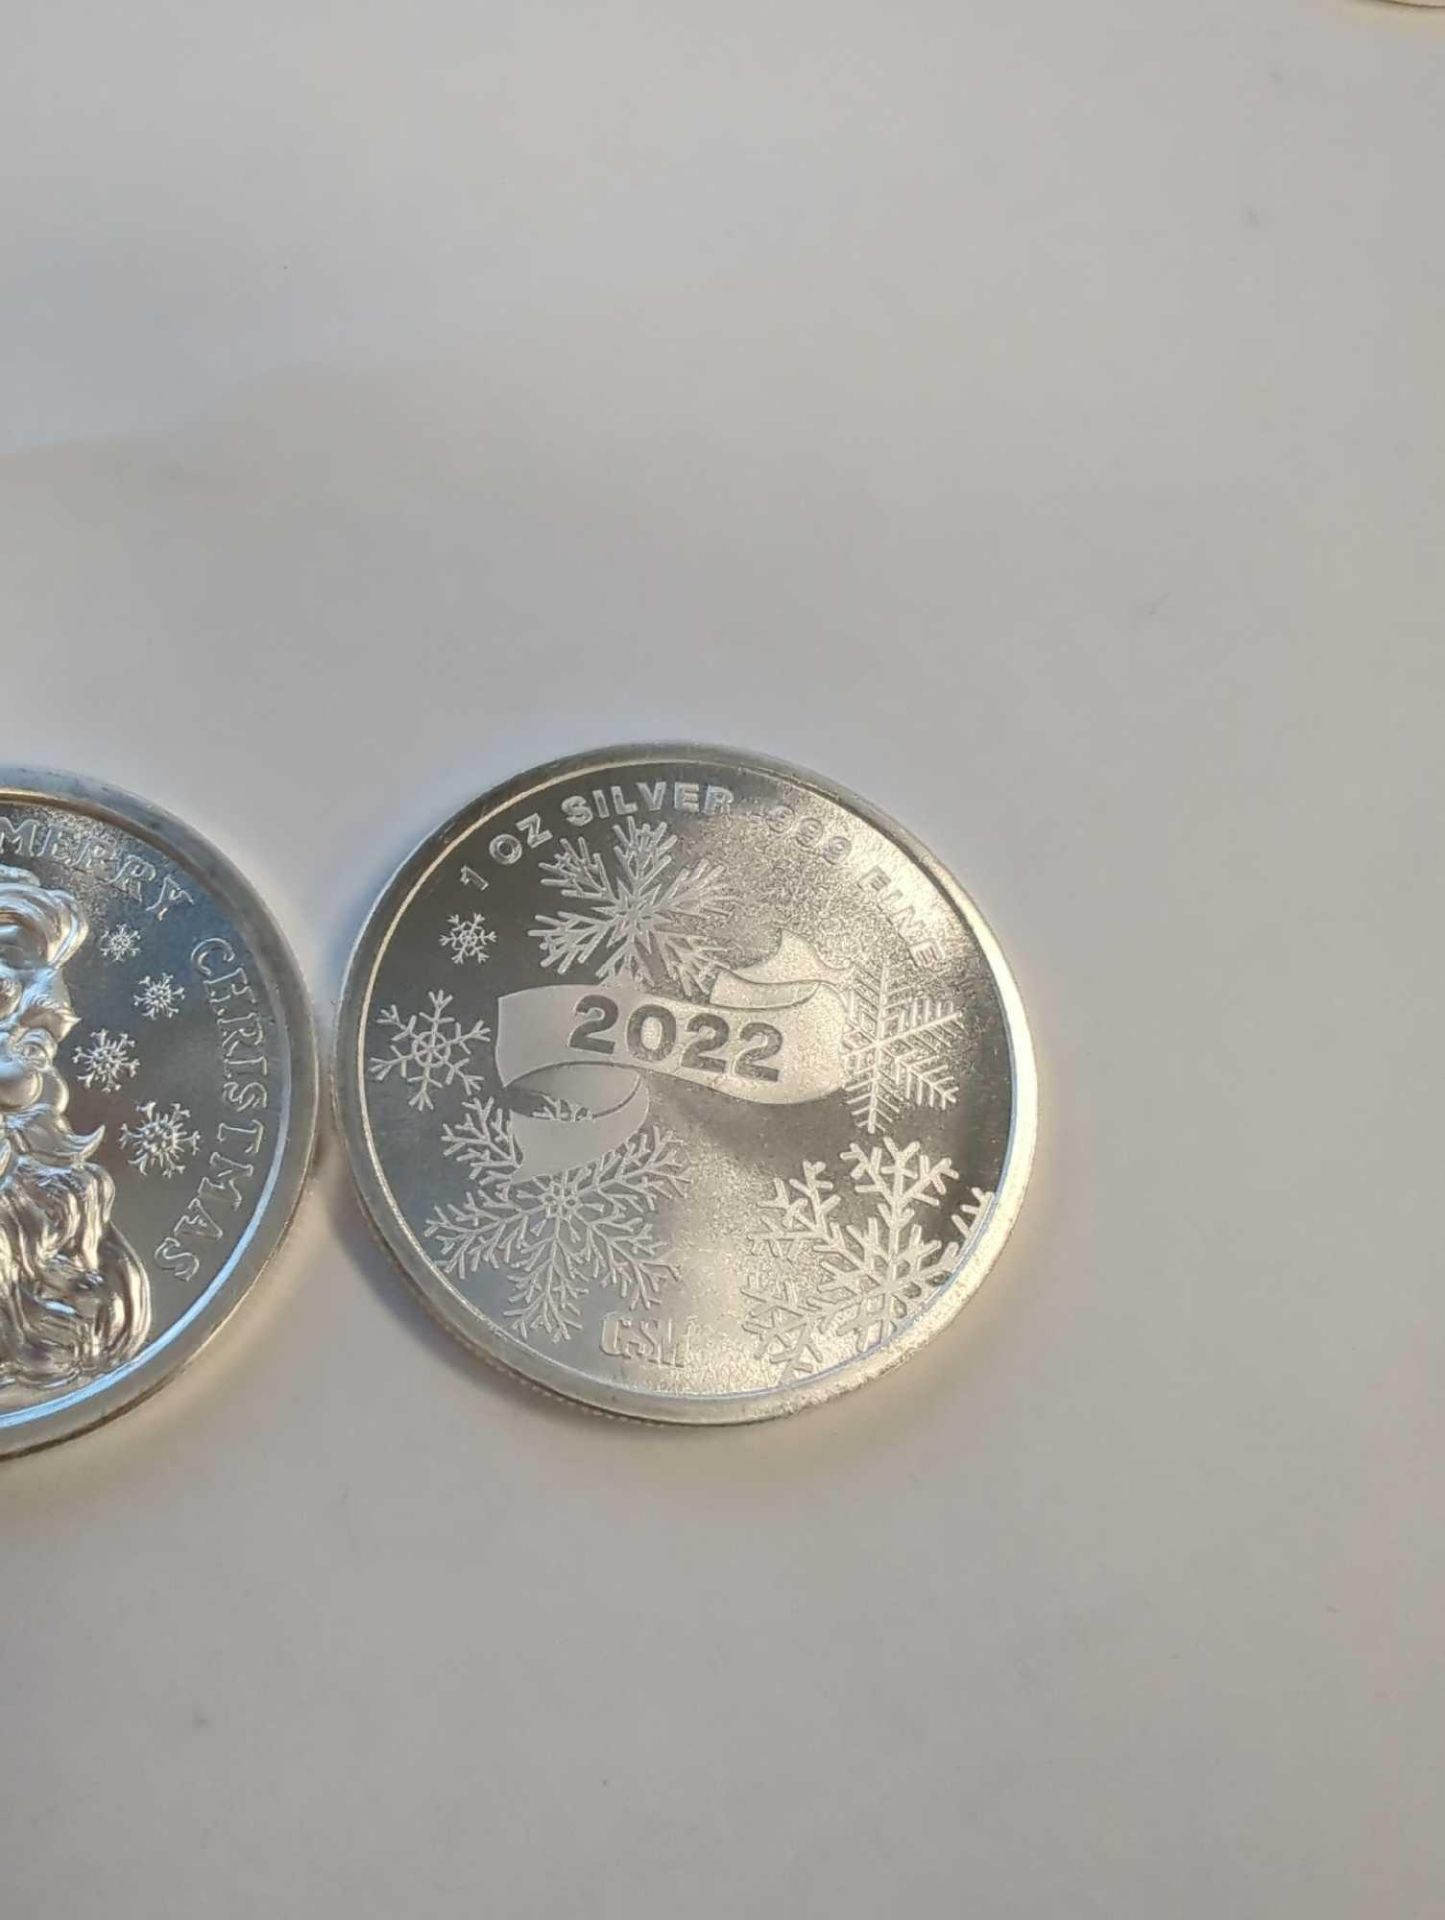 2 2022 merry Christmas silver coins - Image 3 of 3